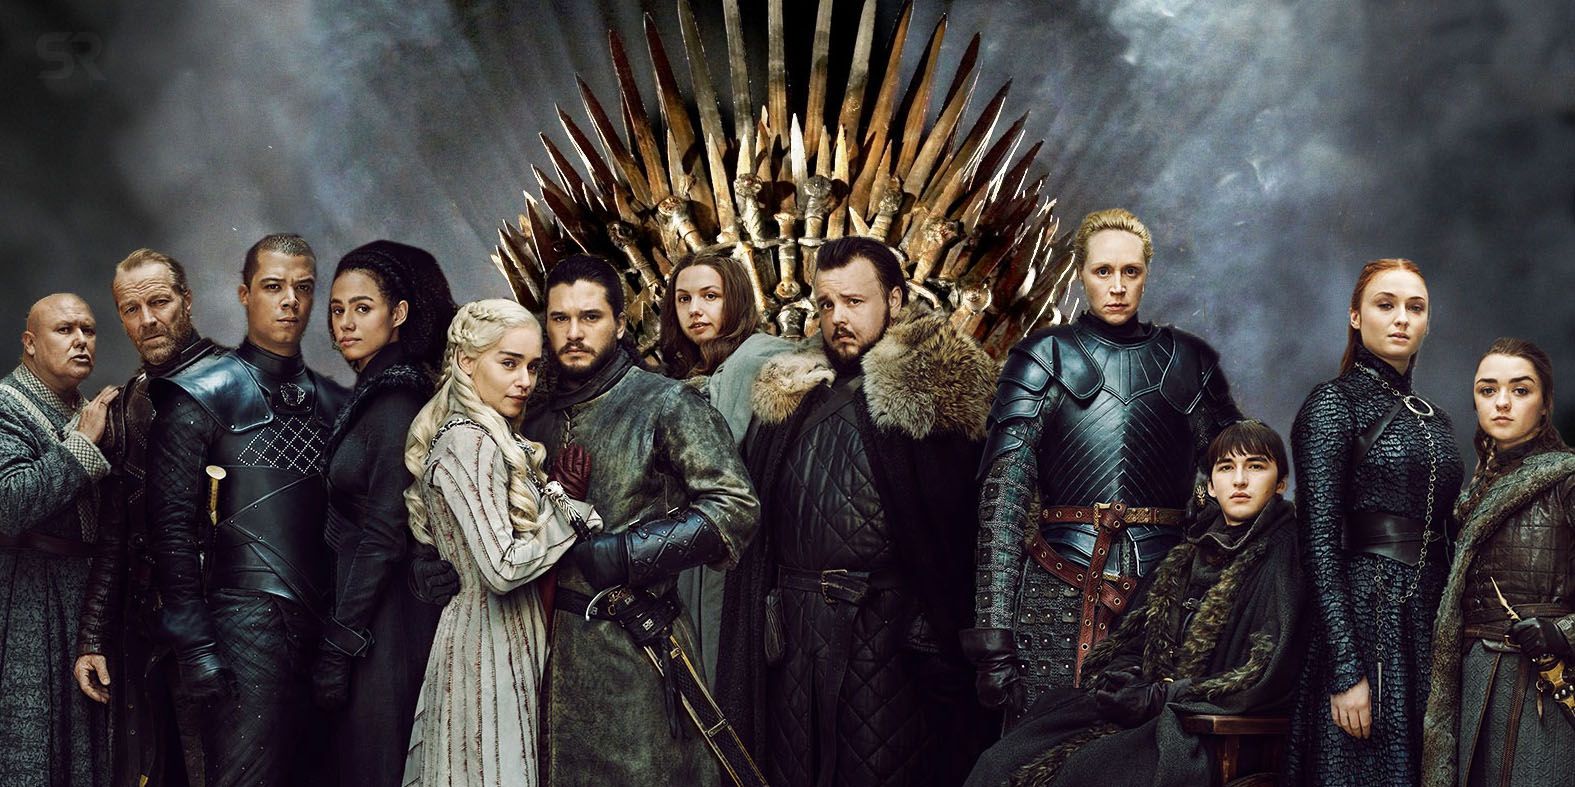 Game of Thrones Review